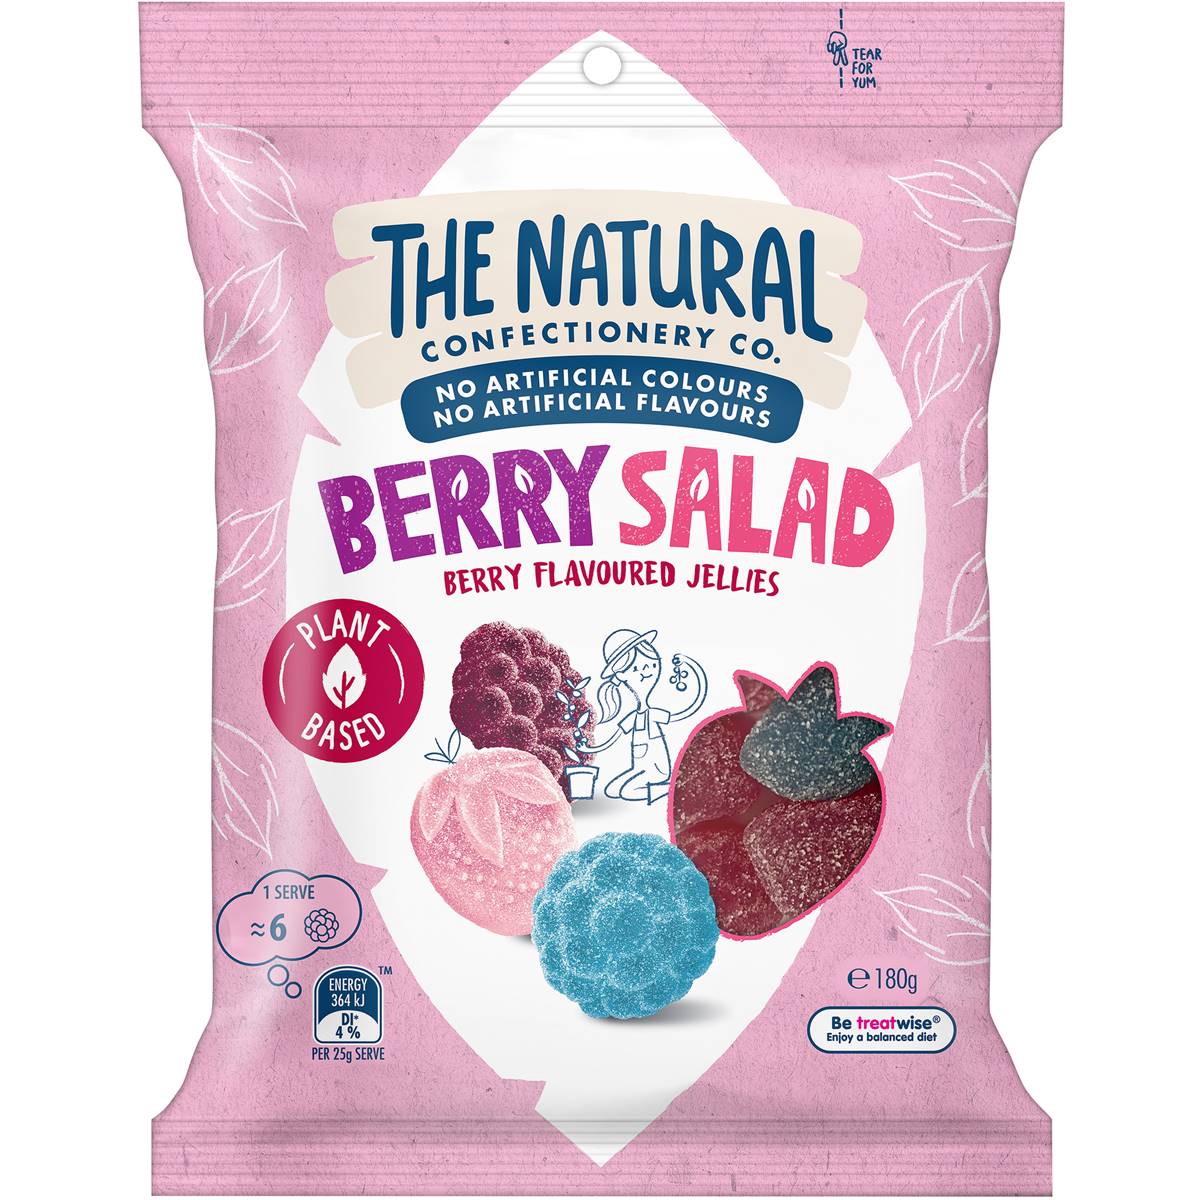 The Natural Confectionery Co. Berry Salad Plant Based Lollies 180g